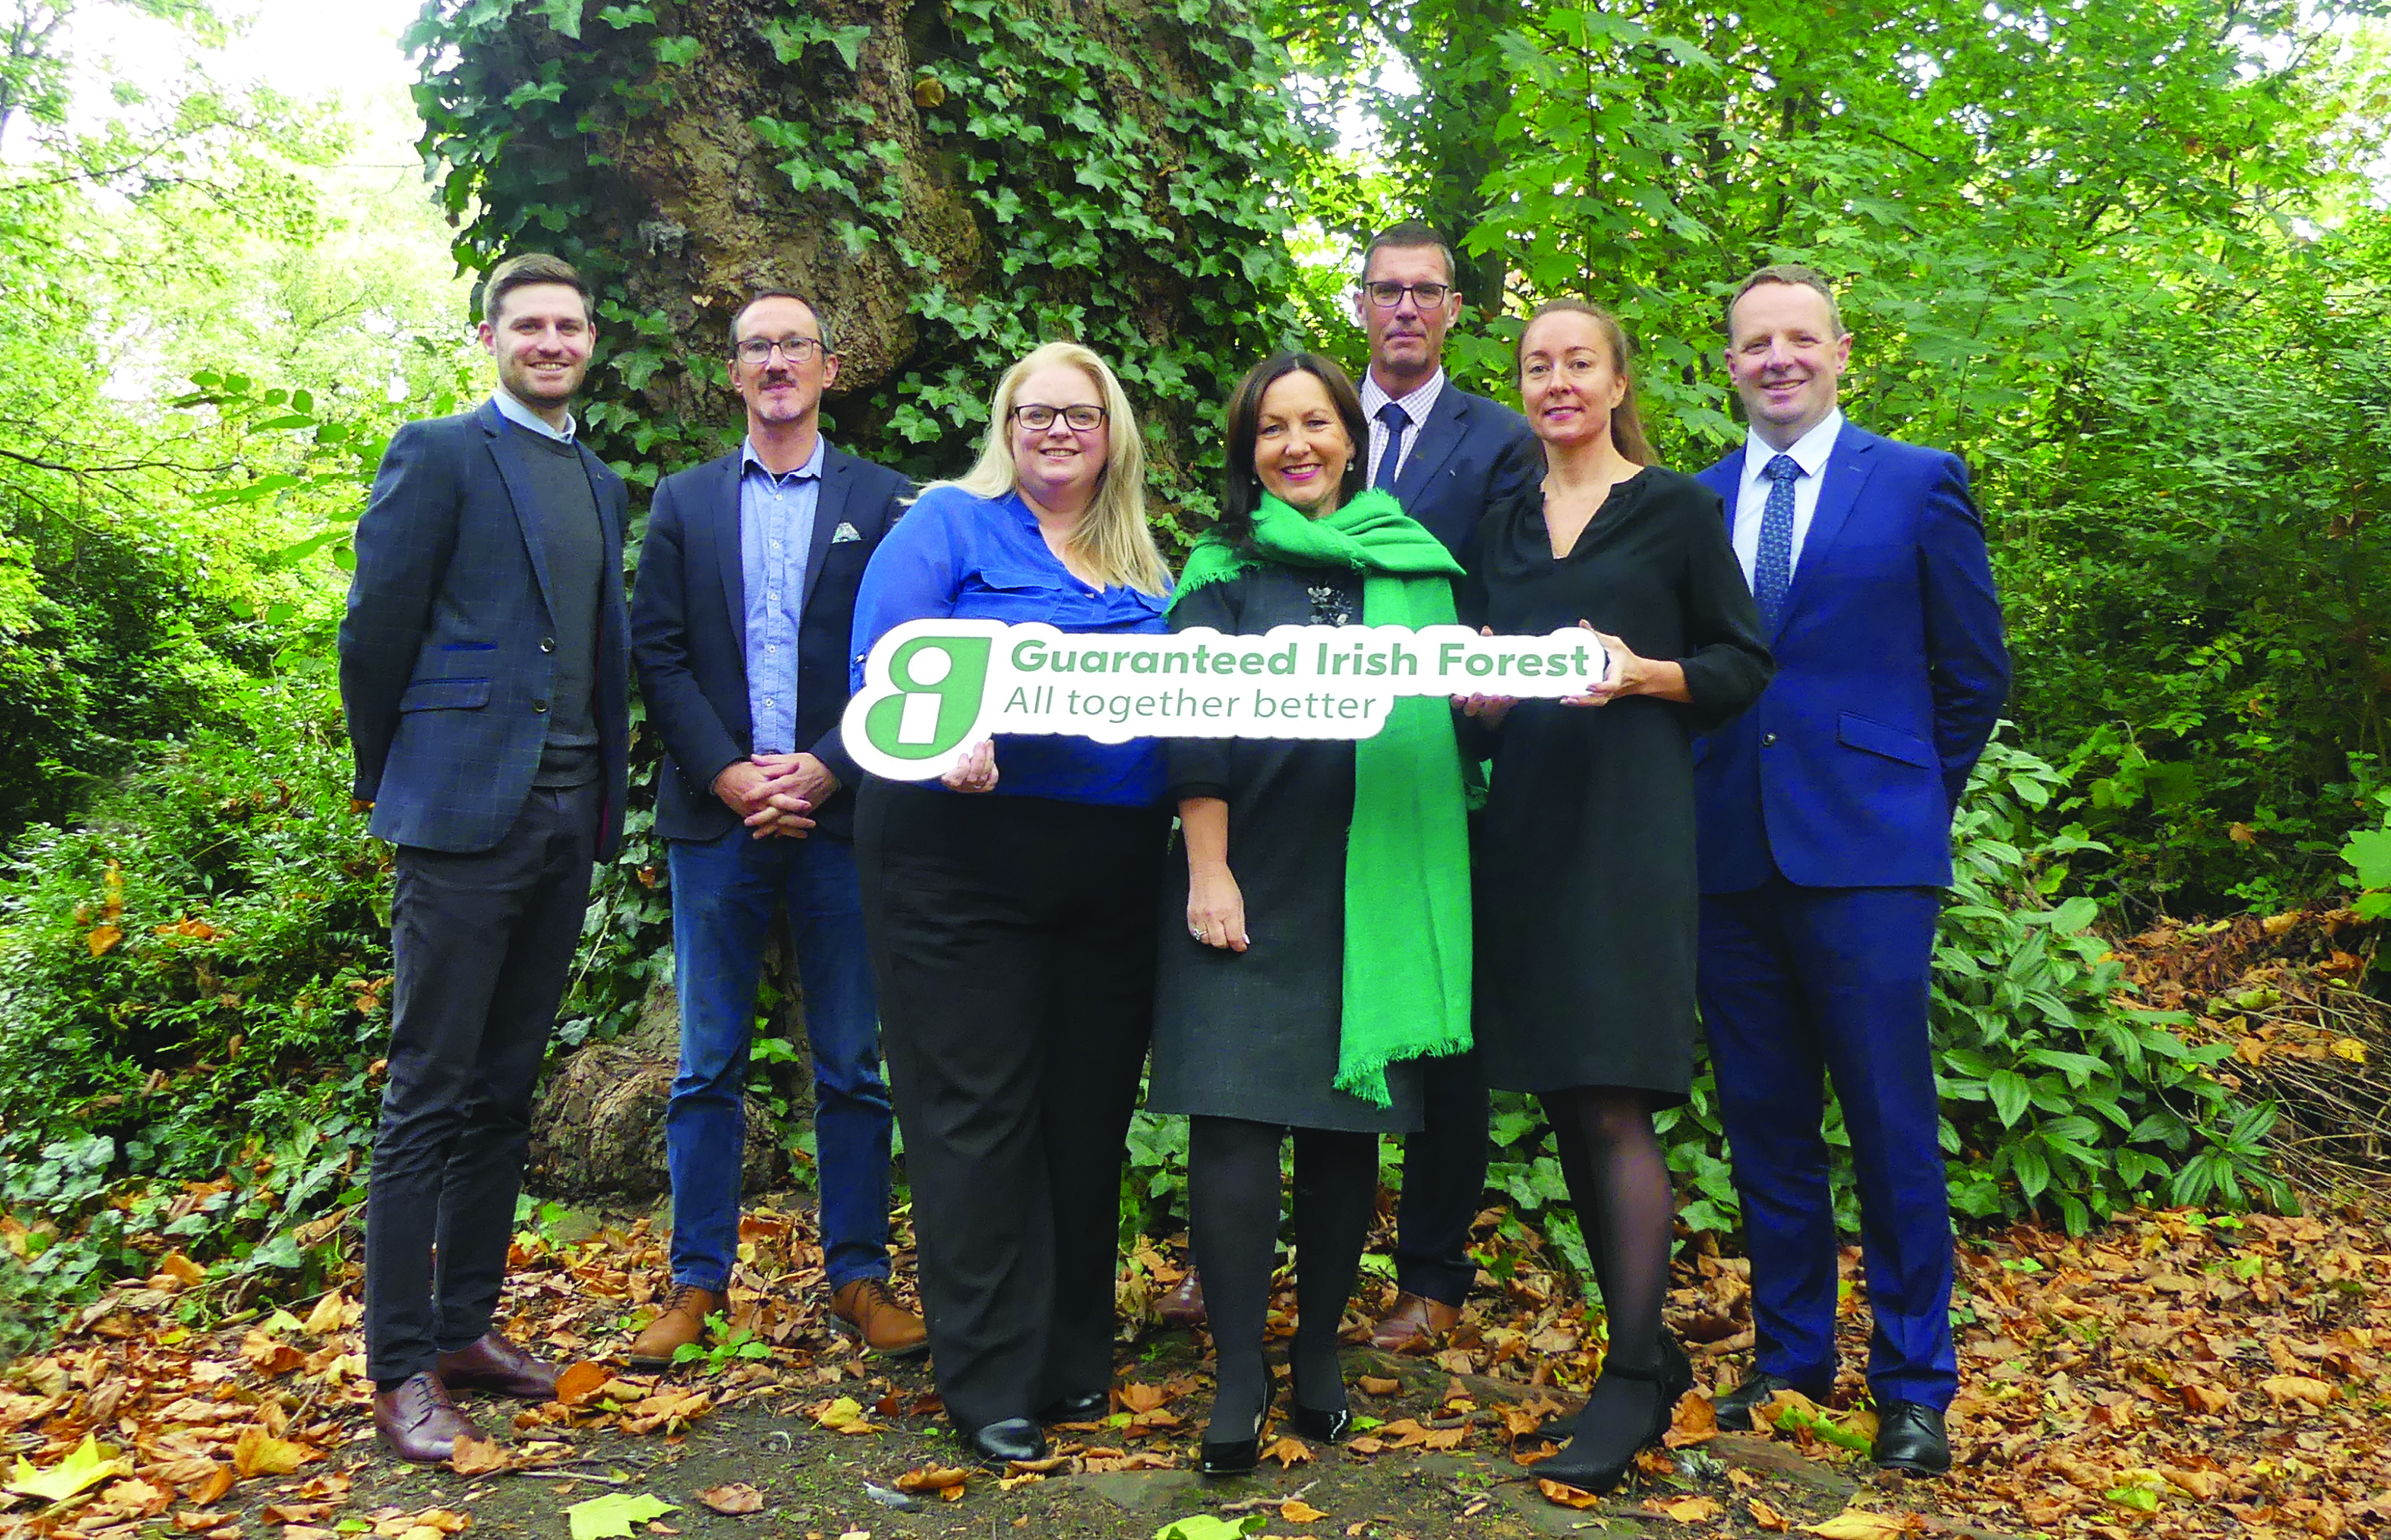 Guaranteed Irish launch ‘Guaranteed Irish Forest’ initiative to start climate action engagement campaign with their members.